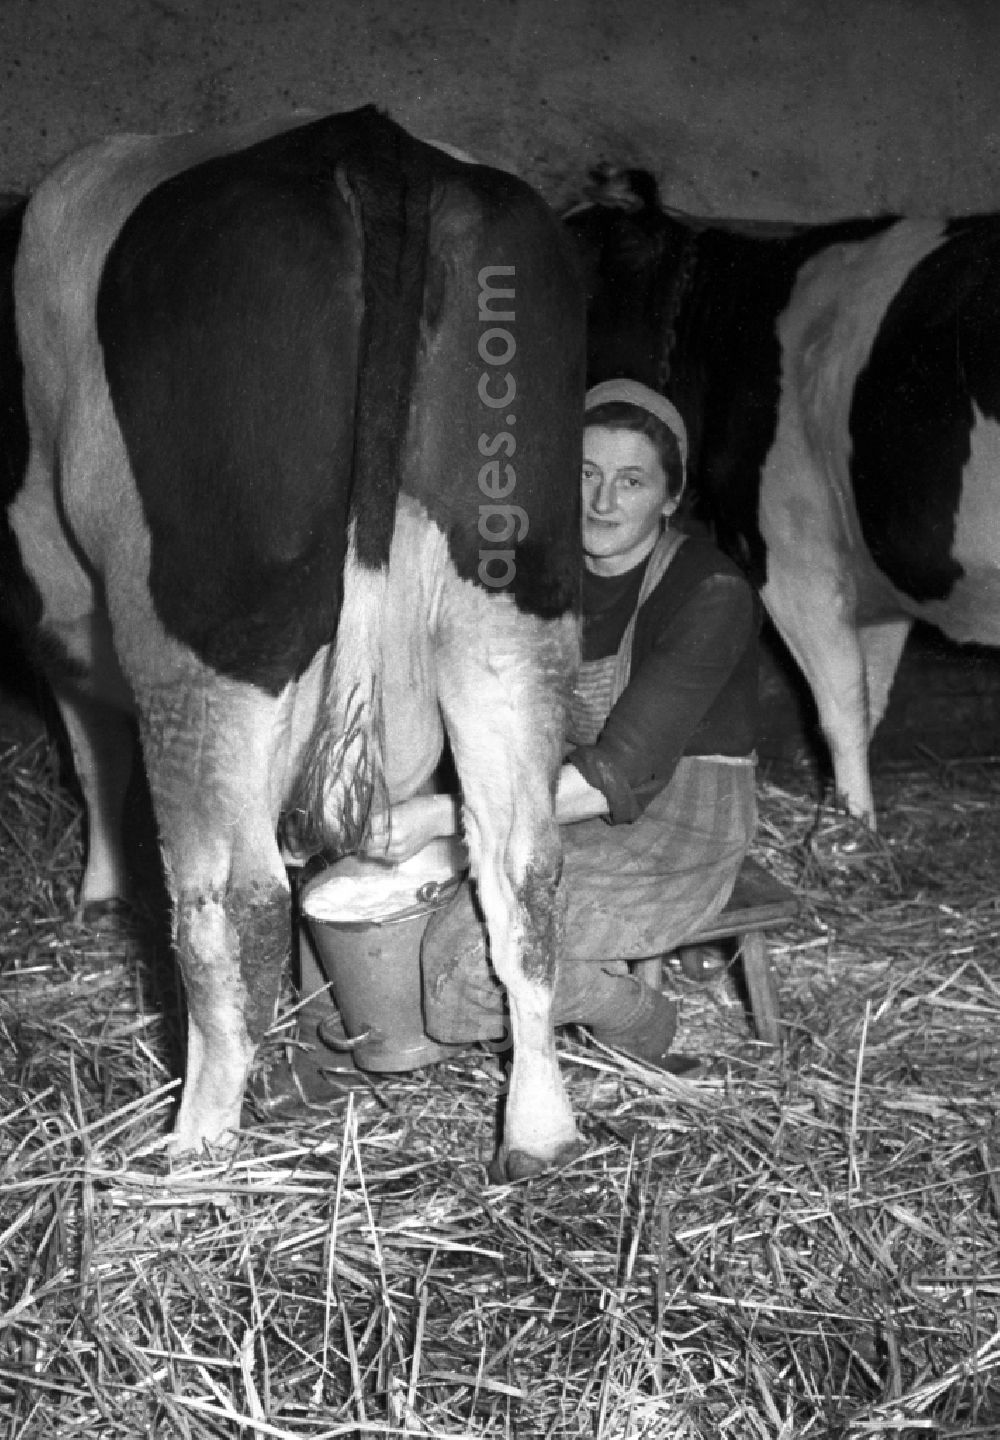 GDR image archive: Reichstädt - Milk production work on a farm in Reichstaedt in the state Thuringia on the territory of the former GDR, German Democratic Republic